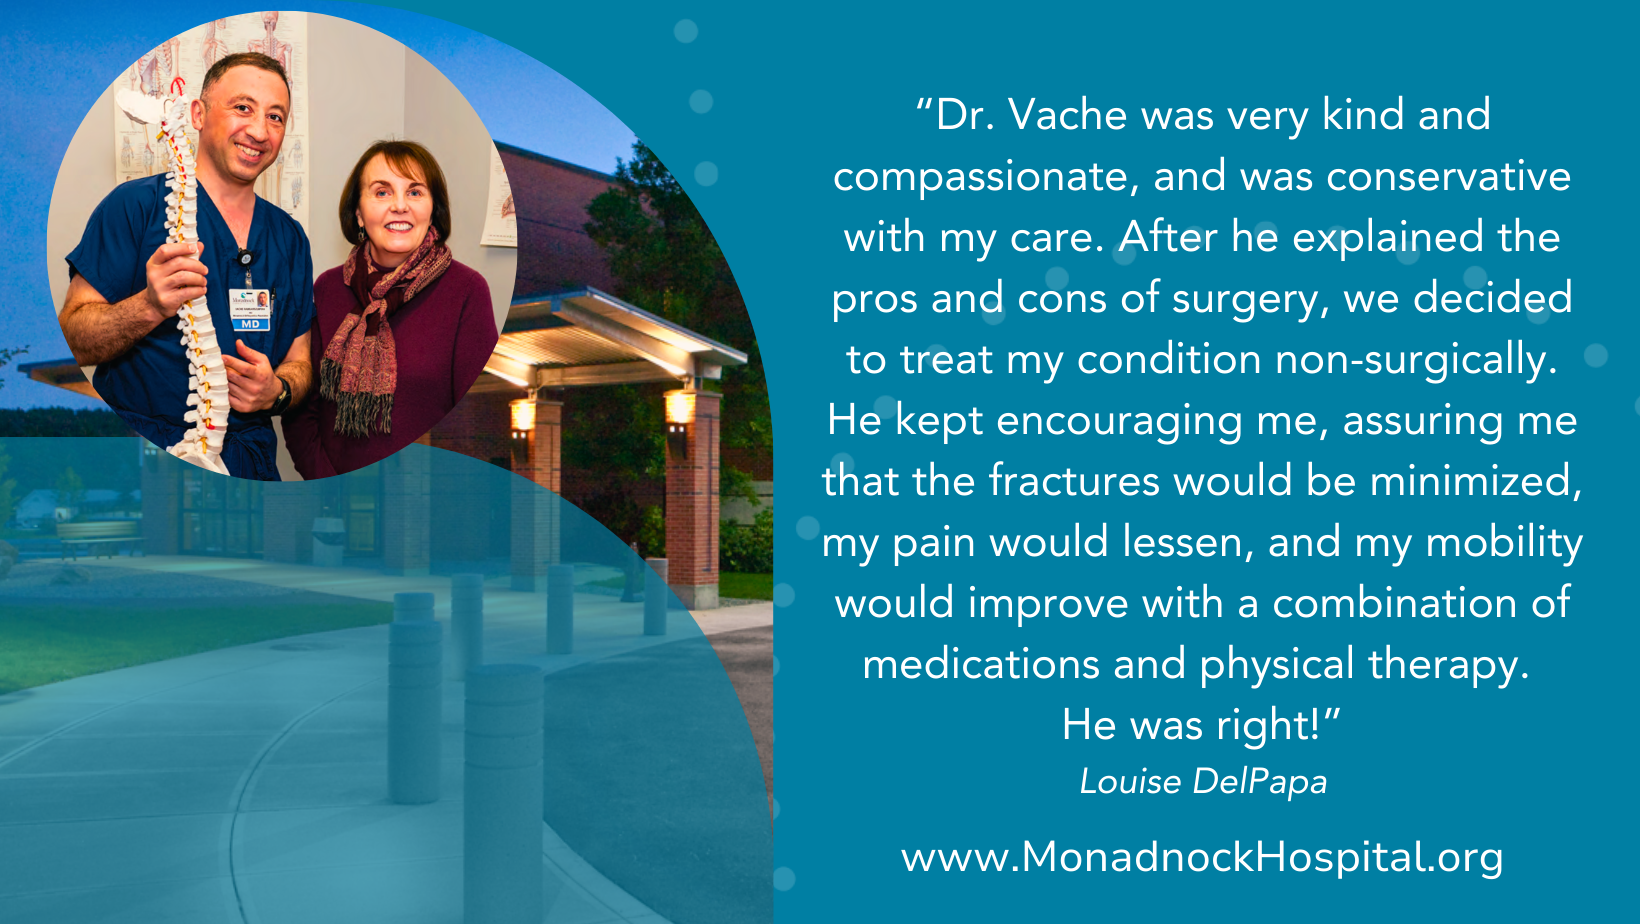 Louise DelPapa Dr. Vache was very kind and compassionate, and was conservative with my care. After he explained the pros and cons of surgery, we decided to treat my condition non-surgically. He kept encouraging me, assuring me that the fractures would be minimized, my pain would lessen, and my mobility would improve with a combination of medications and physical therapy. He was right!